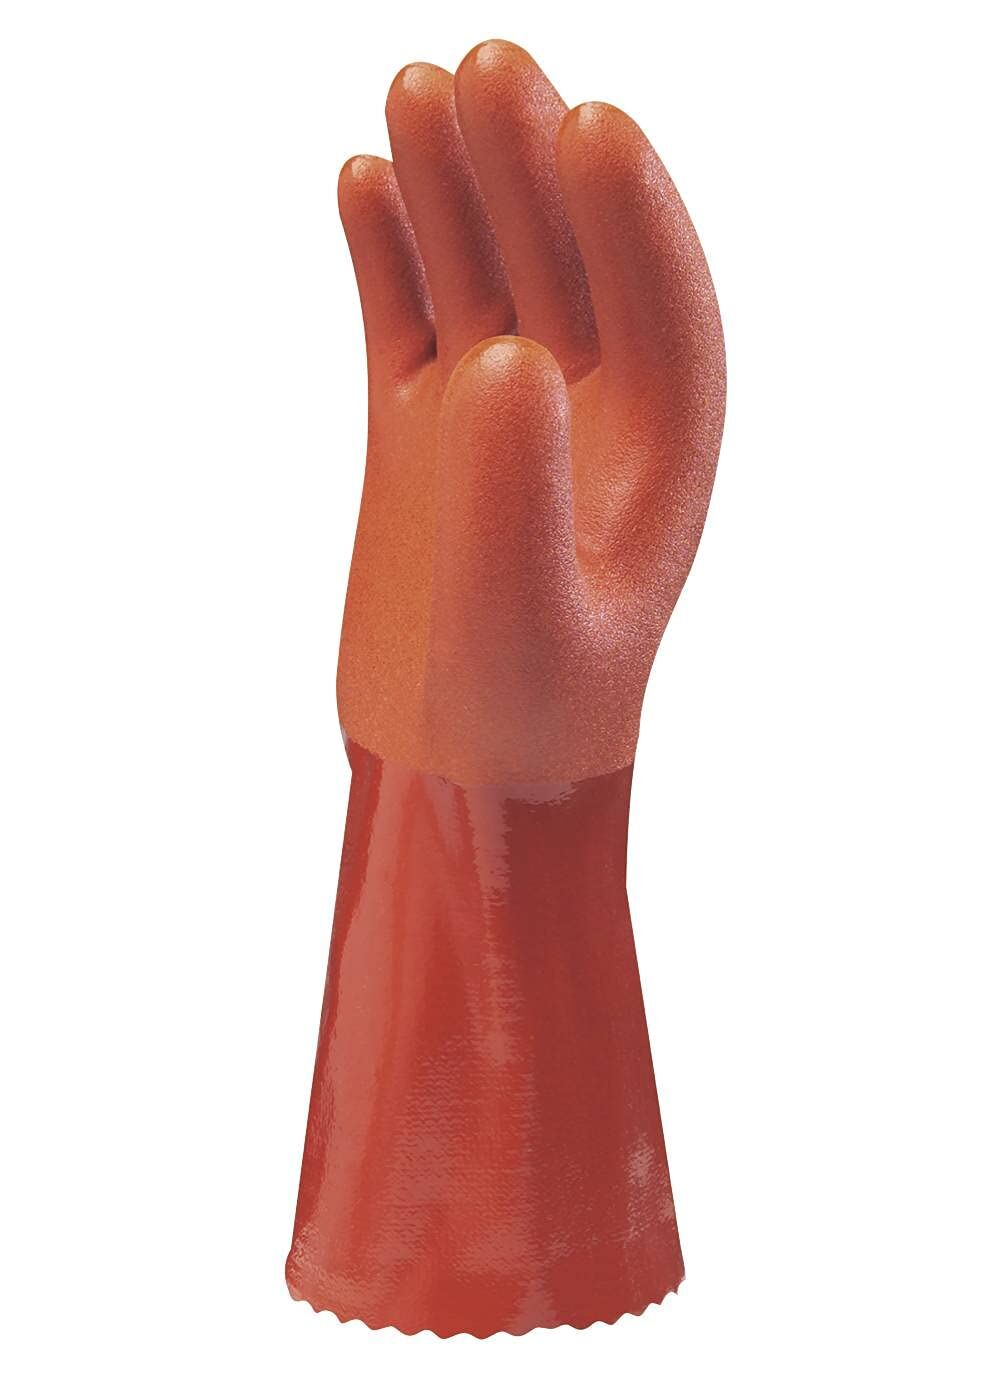 Orange Fully Coated Double-Dipped PVC Glove